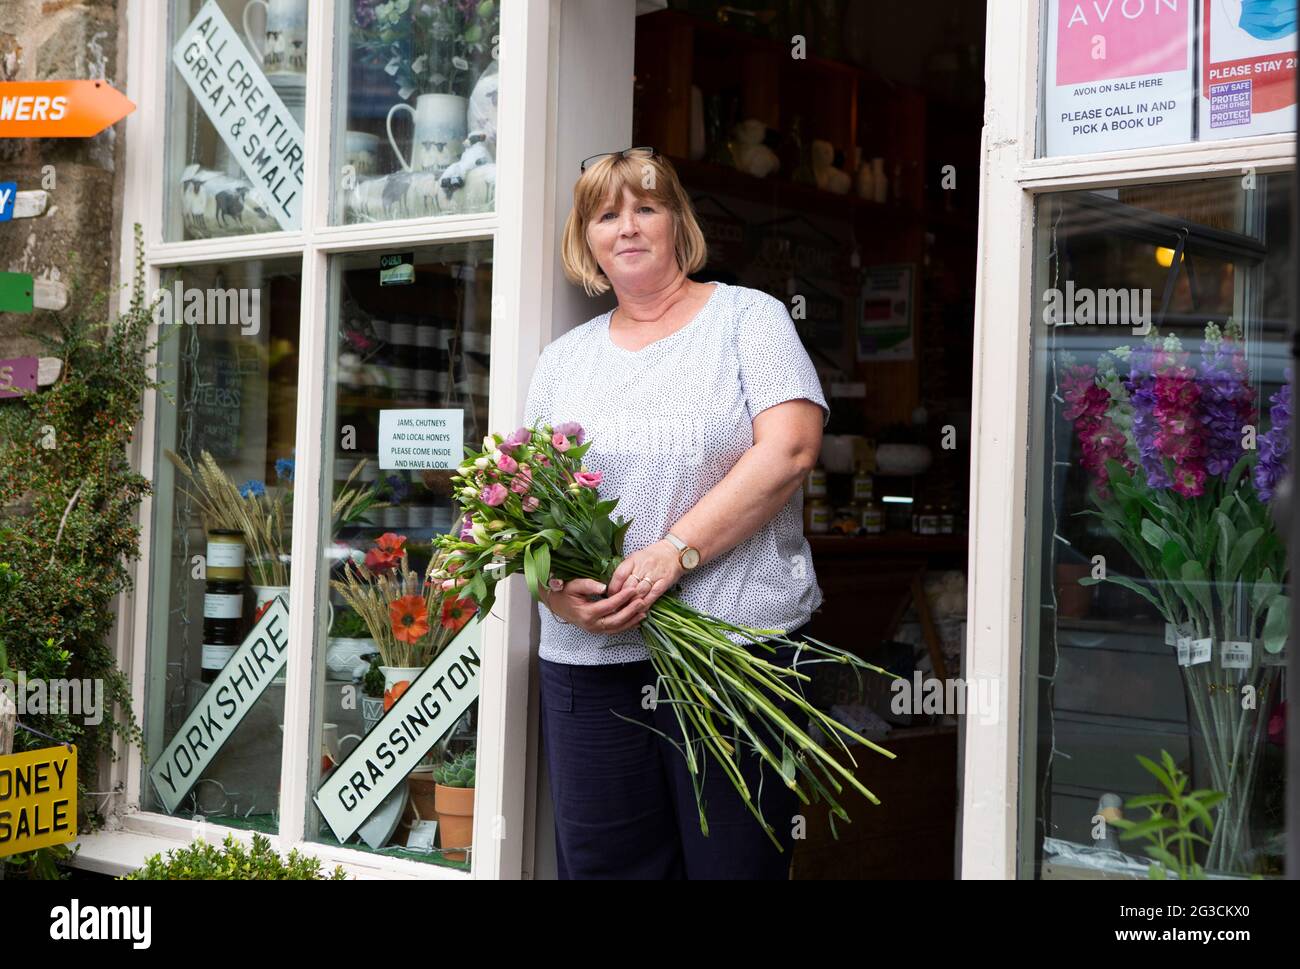 Julia Metcalfe (56) photographed in her shop The Flower Loft in Grassington in the Yorkshire Dales. The town has recently been used to film the new se Stock Photo